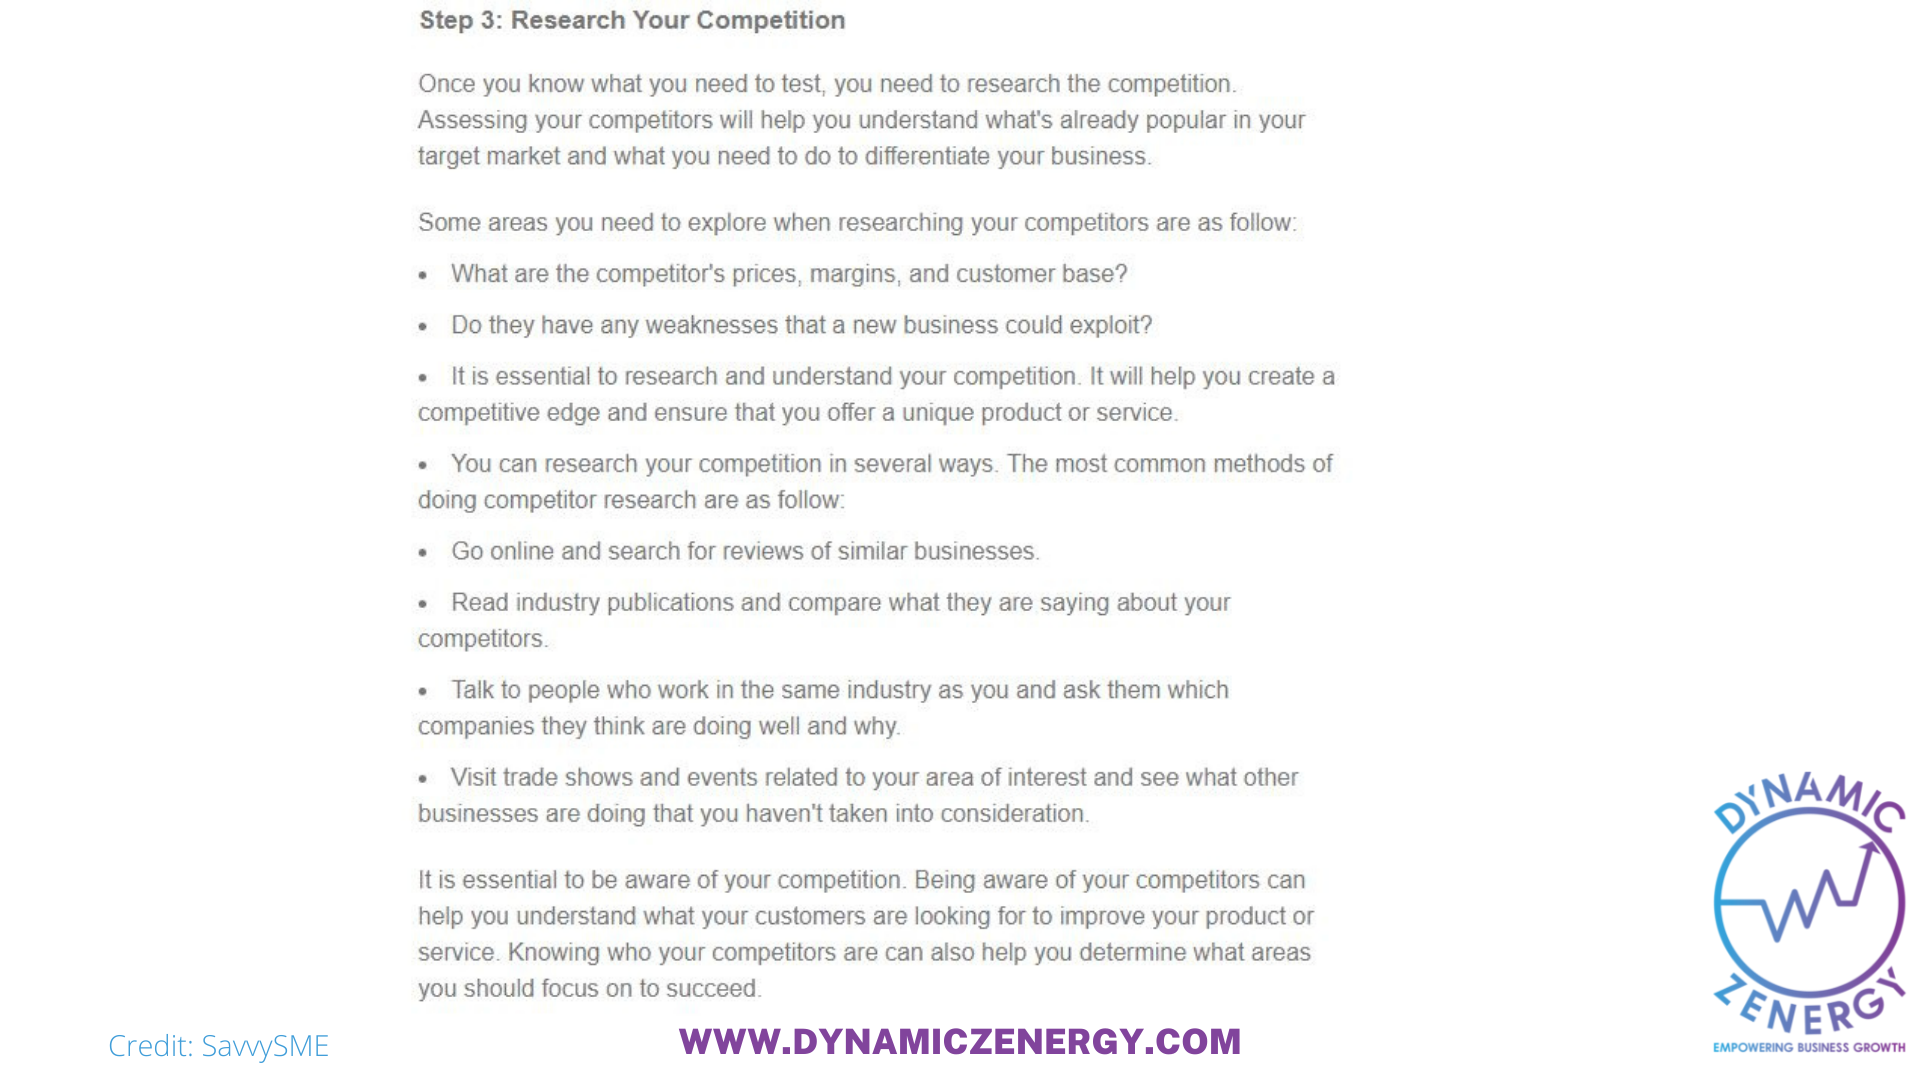 Research Your Competition